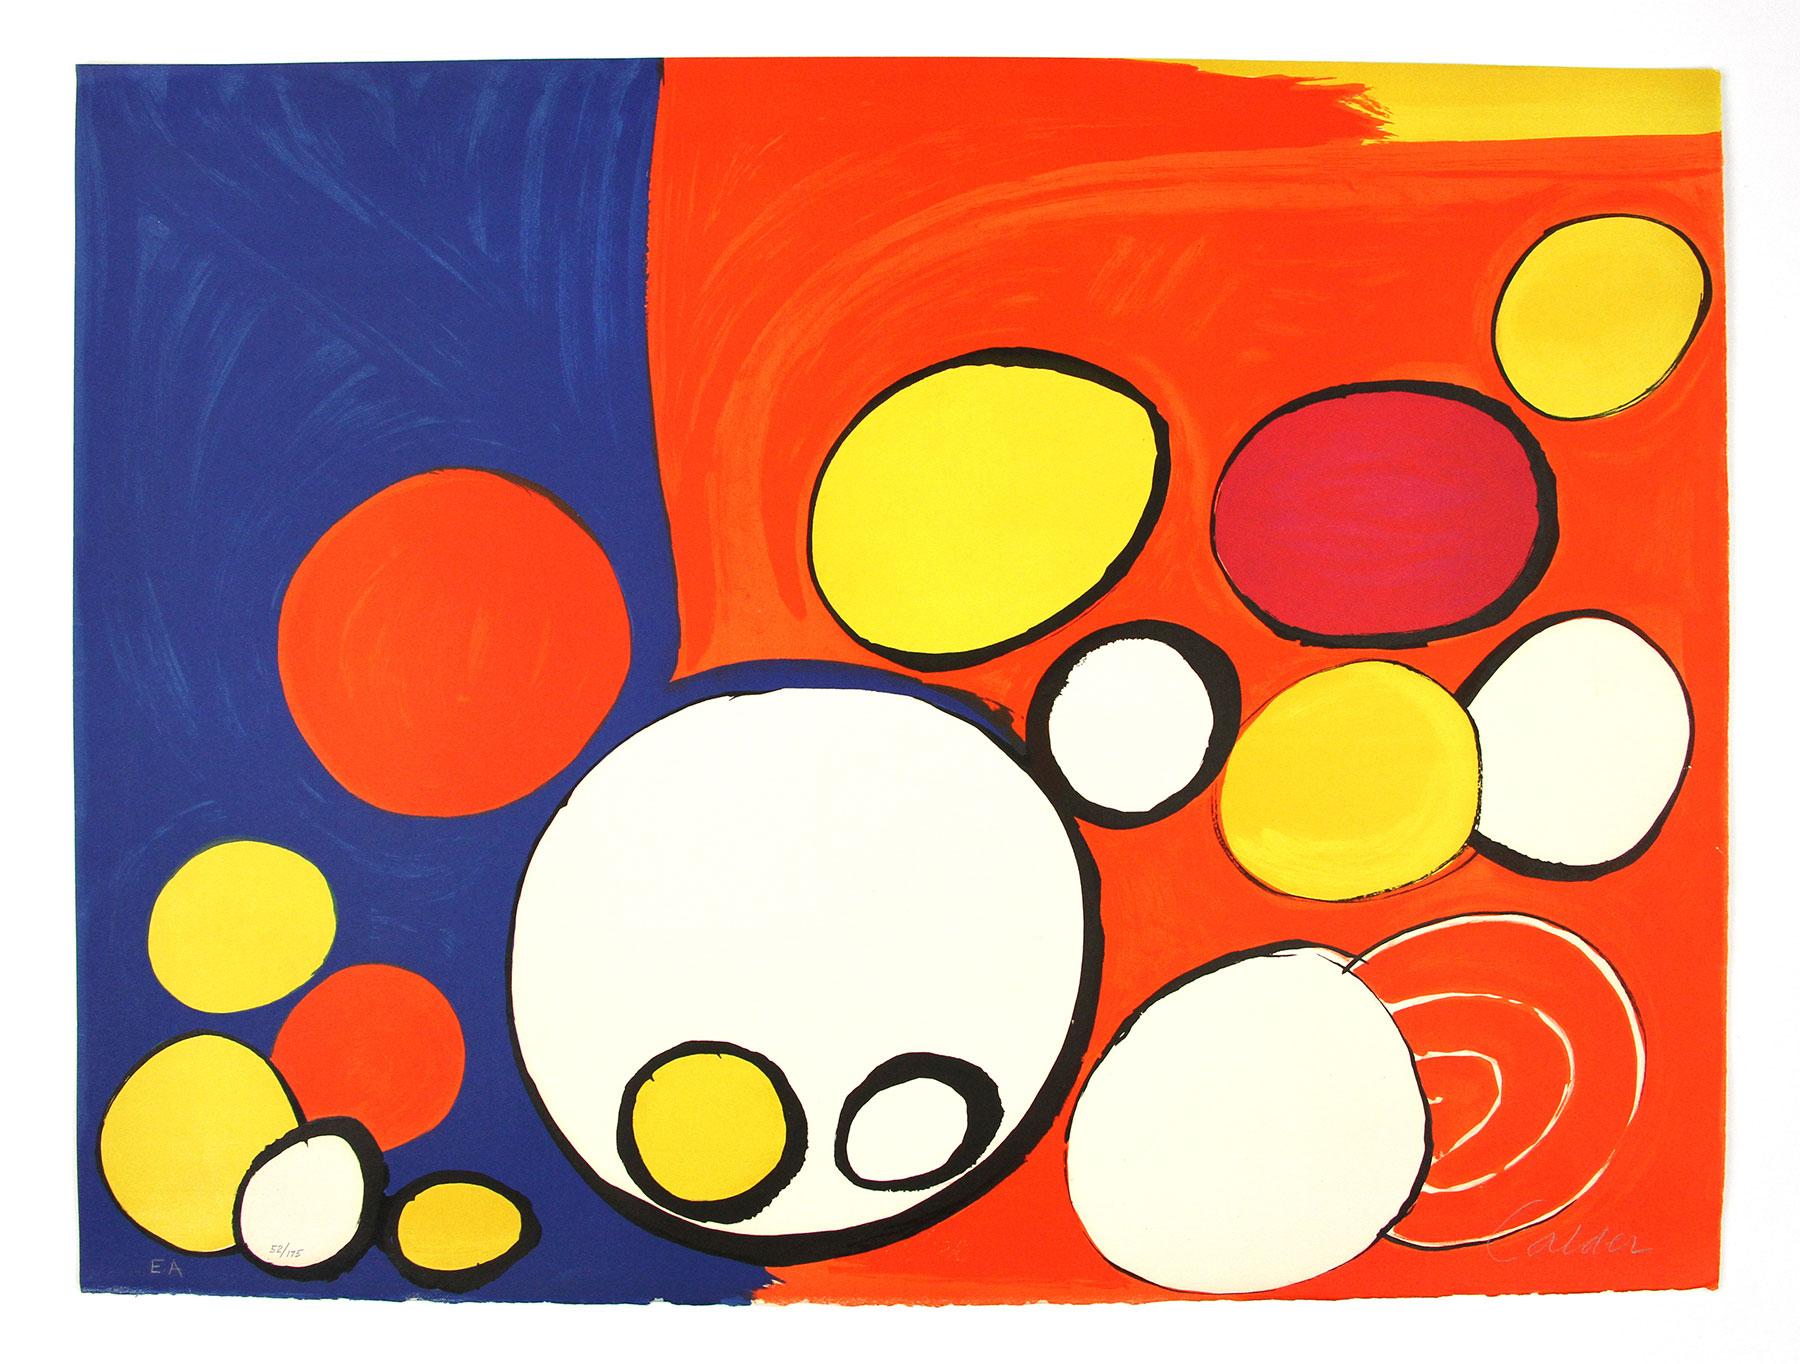 Alexander Calder (American, 1898-1976), "Circle With Eyes," lithograph, signed "Calder" lower left, having authentication label from The Collectors Guild